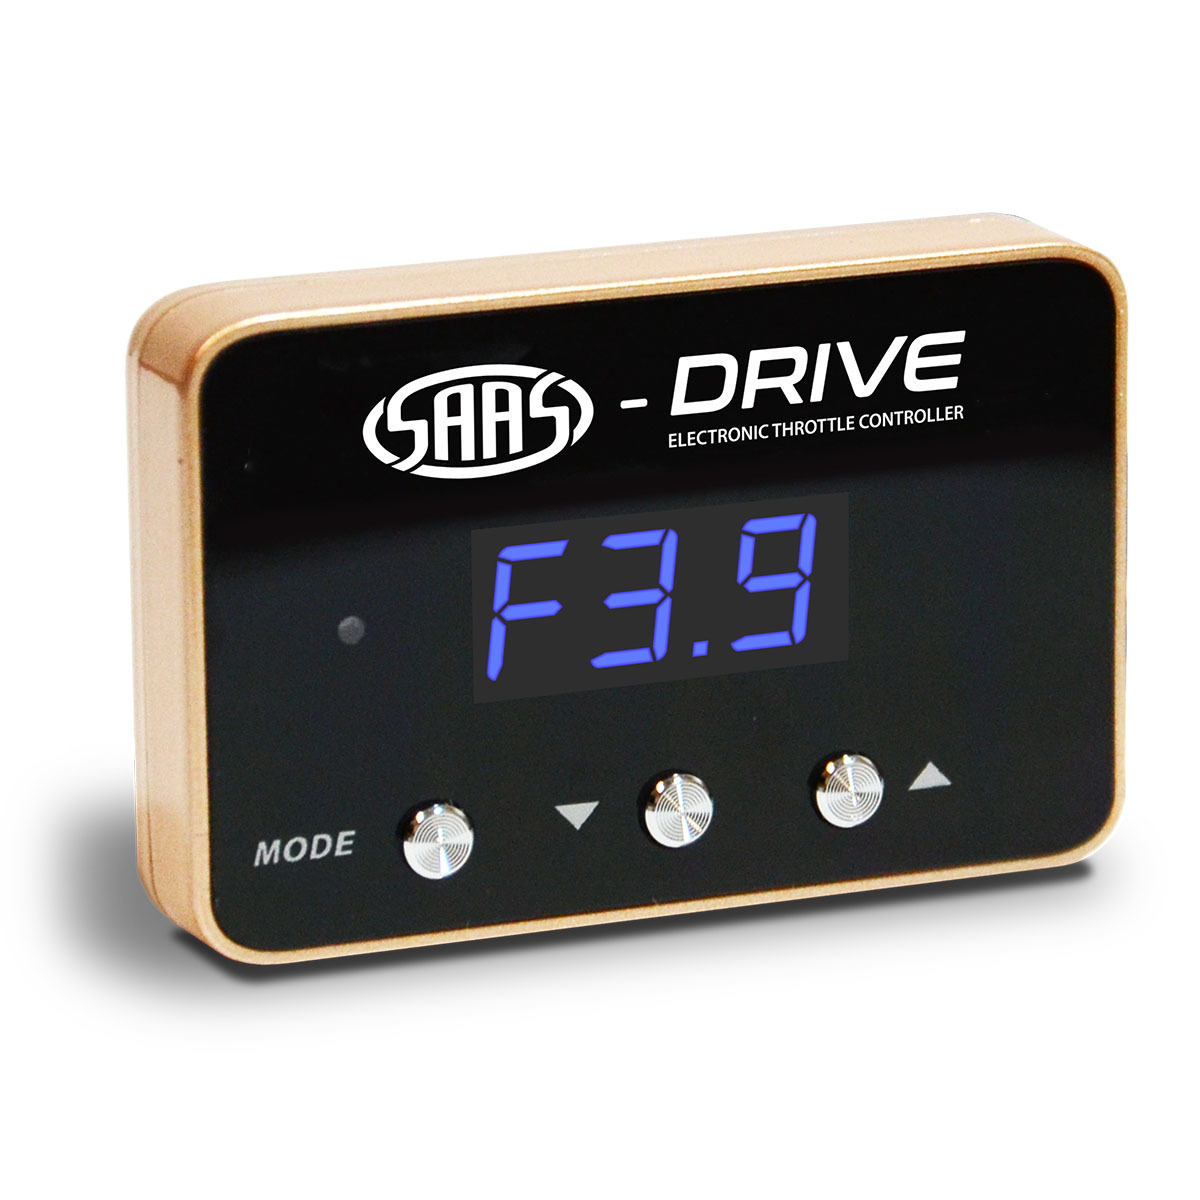 SAAS-Drive Audi A3 Typ 8P/8V 2004 > Throttle Controller 